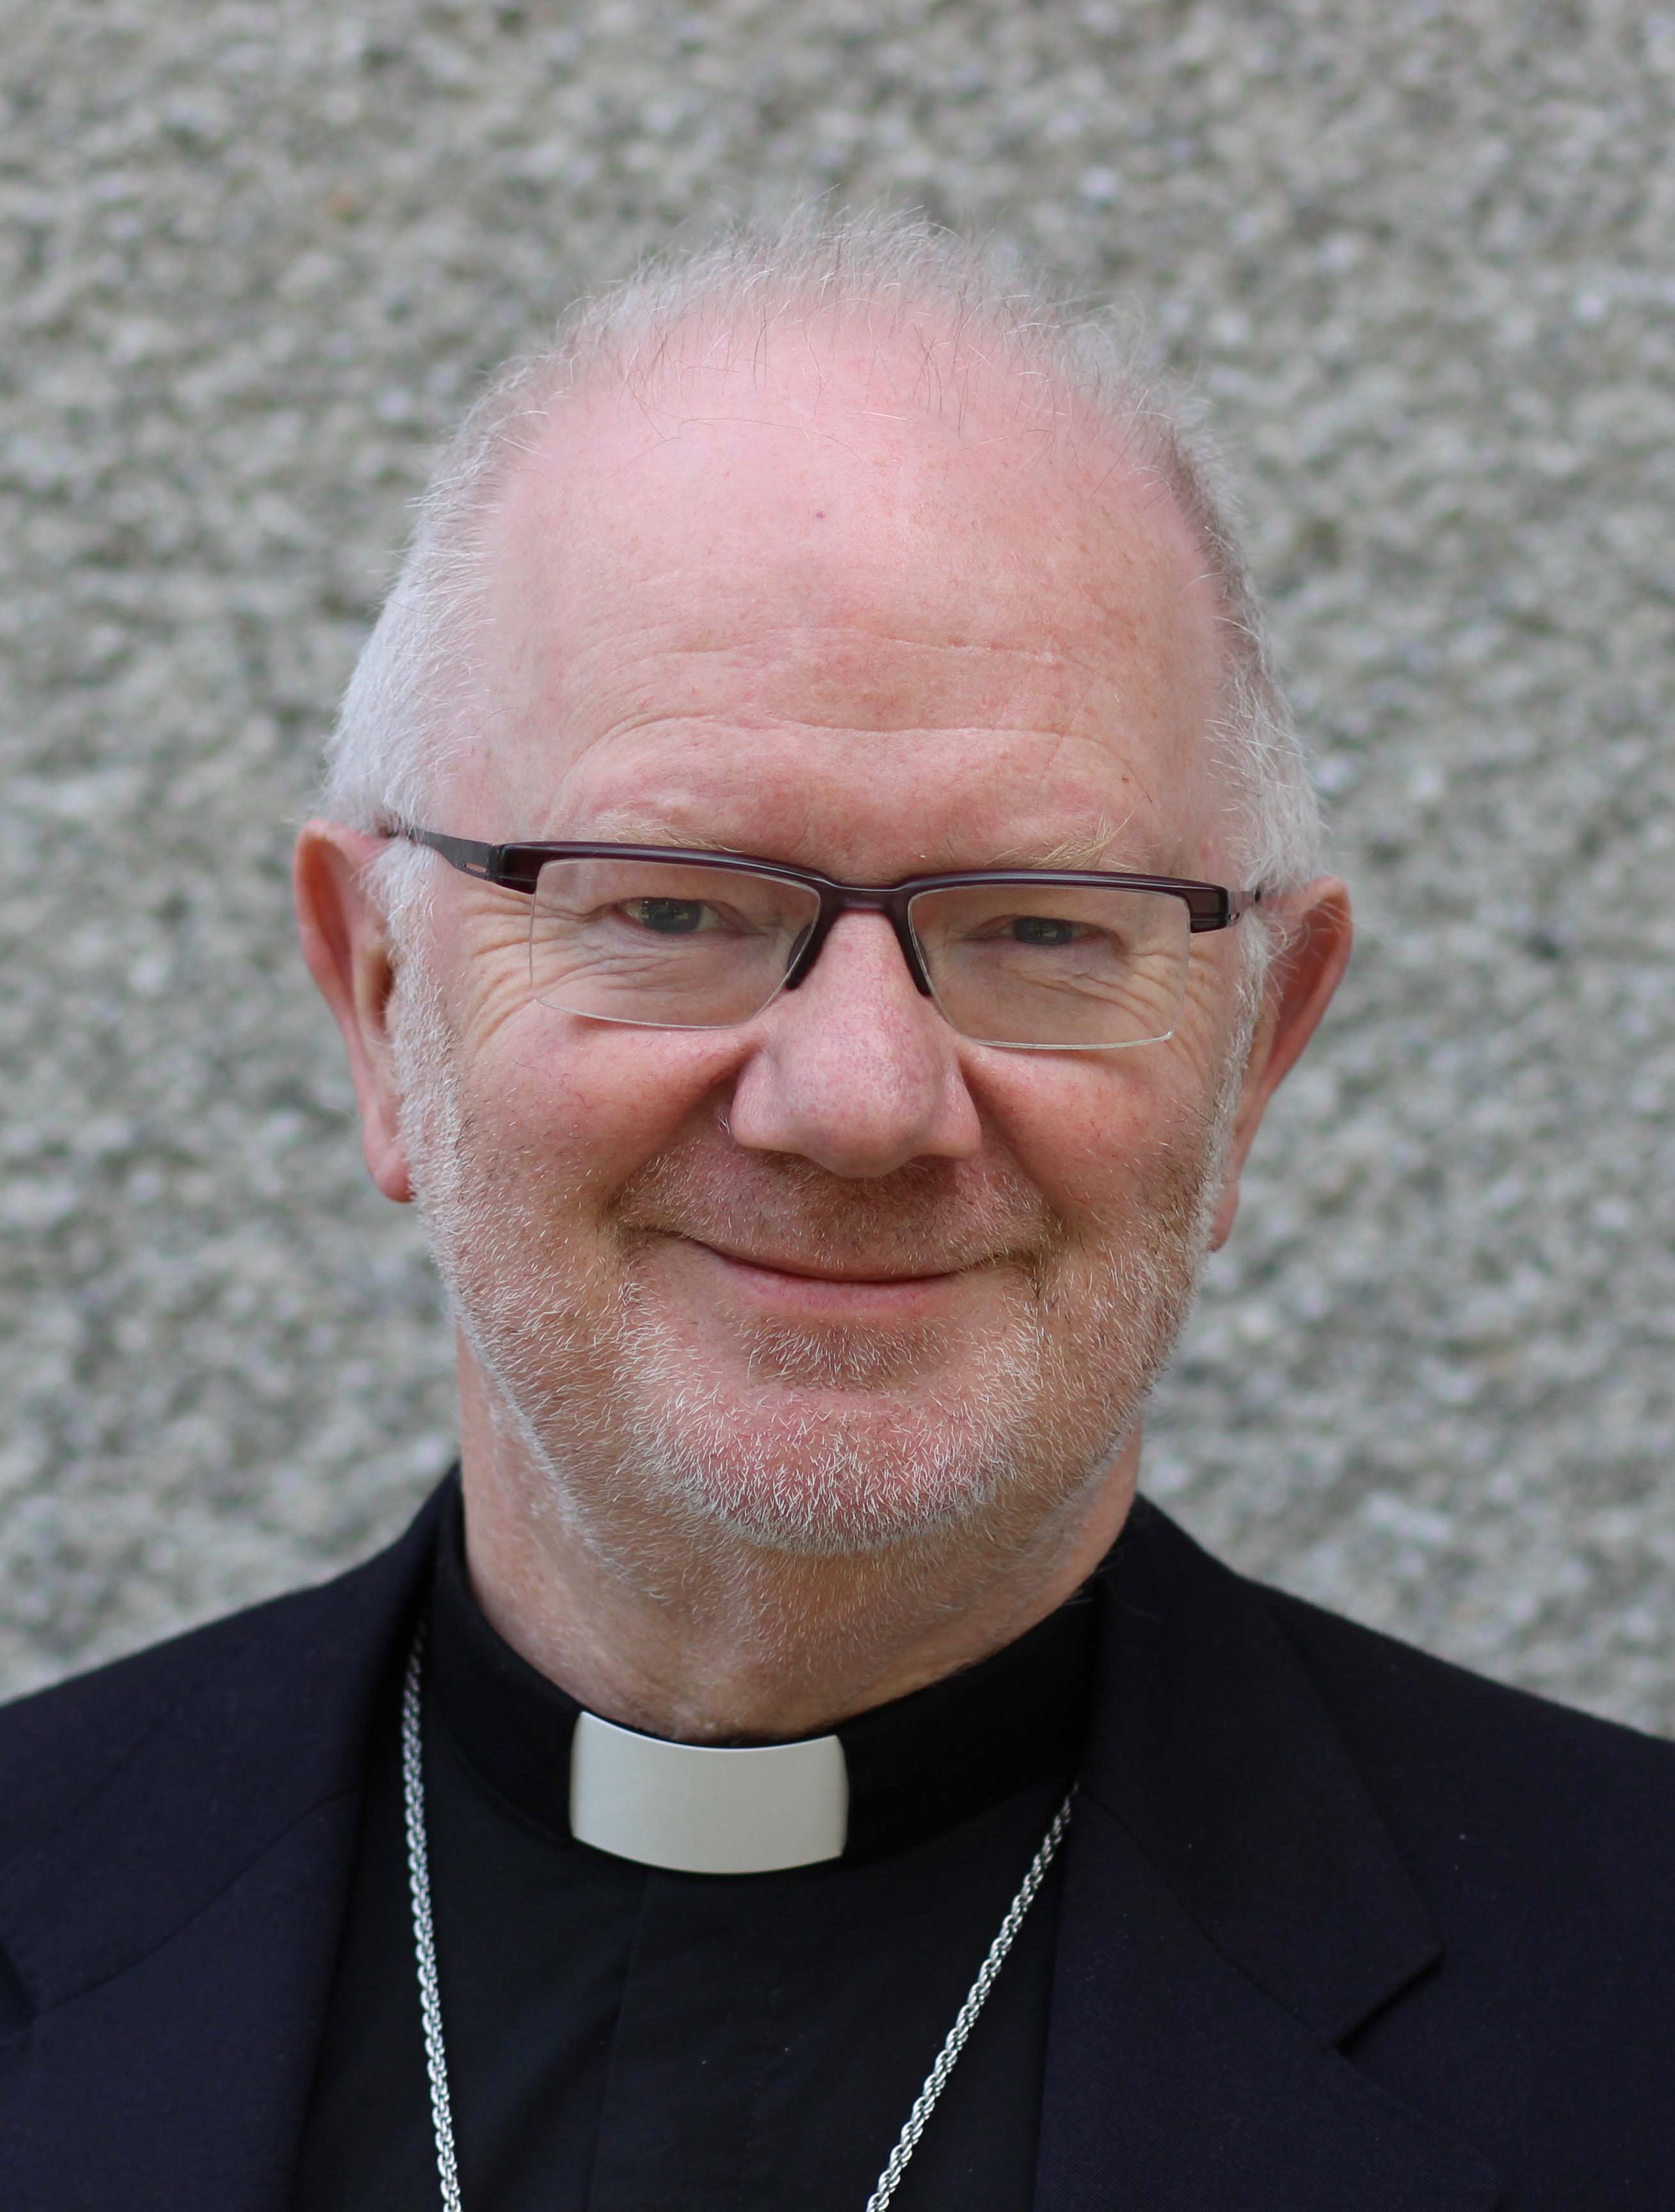 The Archbishop of Armagh and Primate of All Ireland, the Most Revd Dr Richard Clarke.